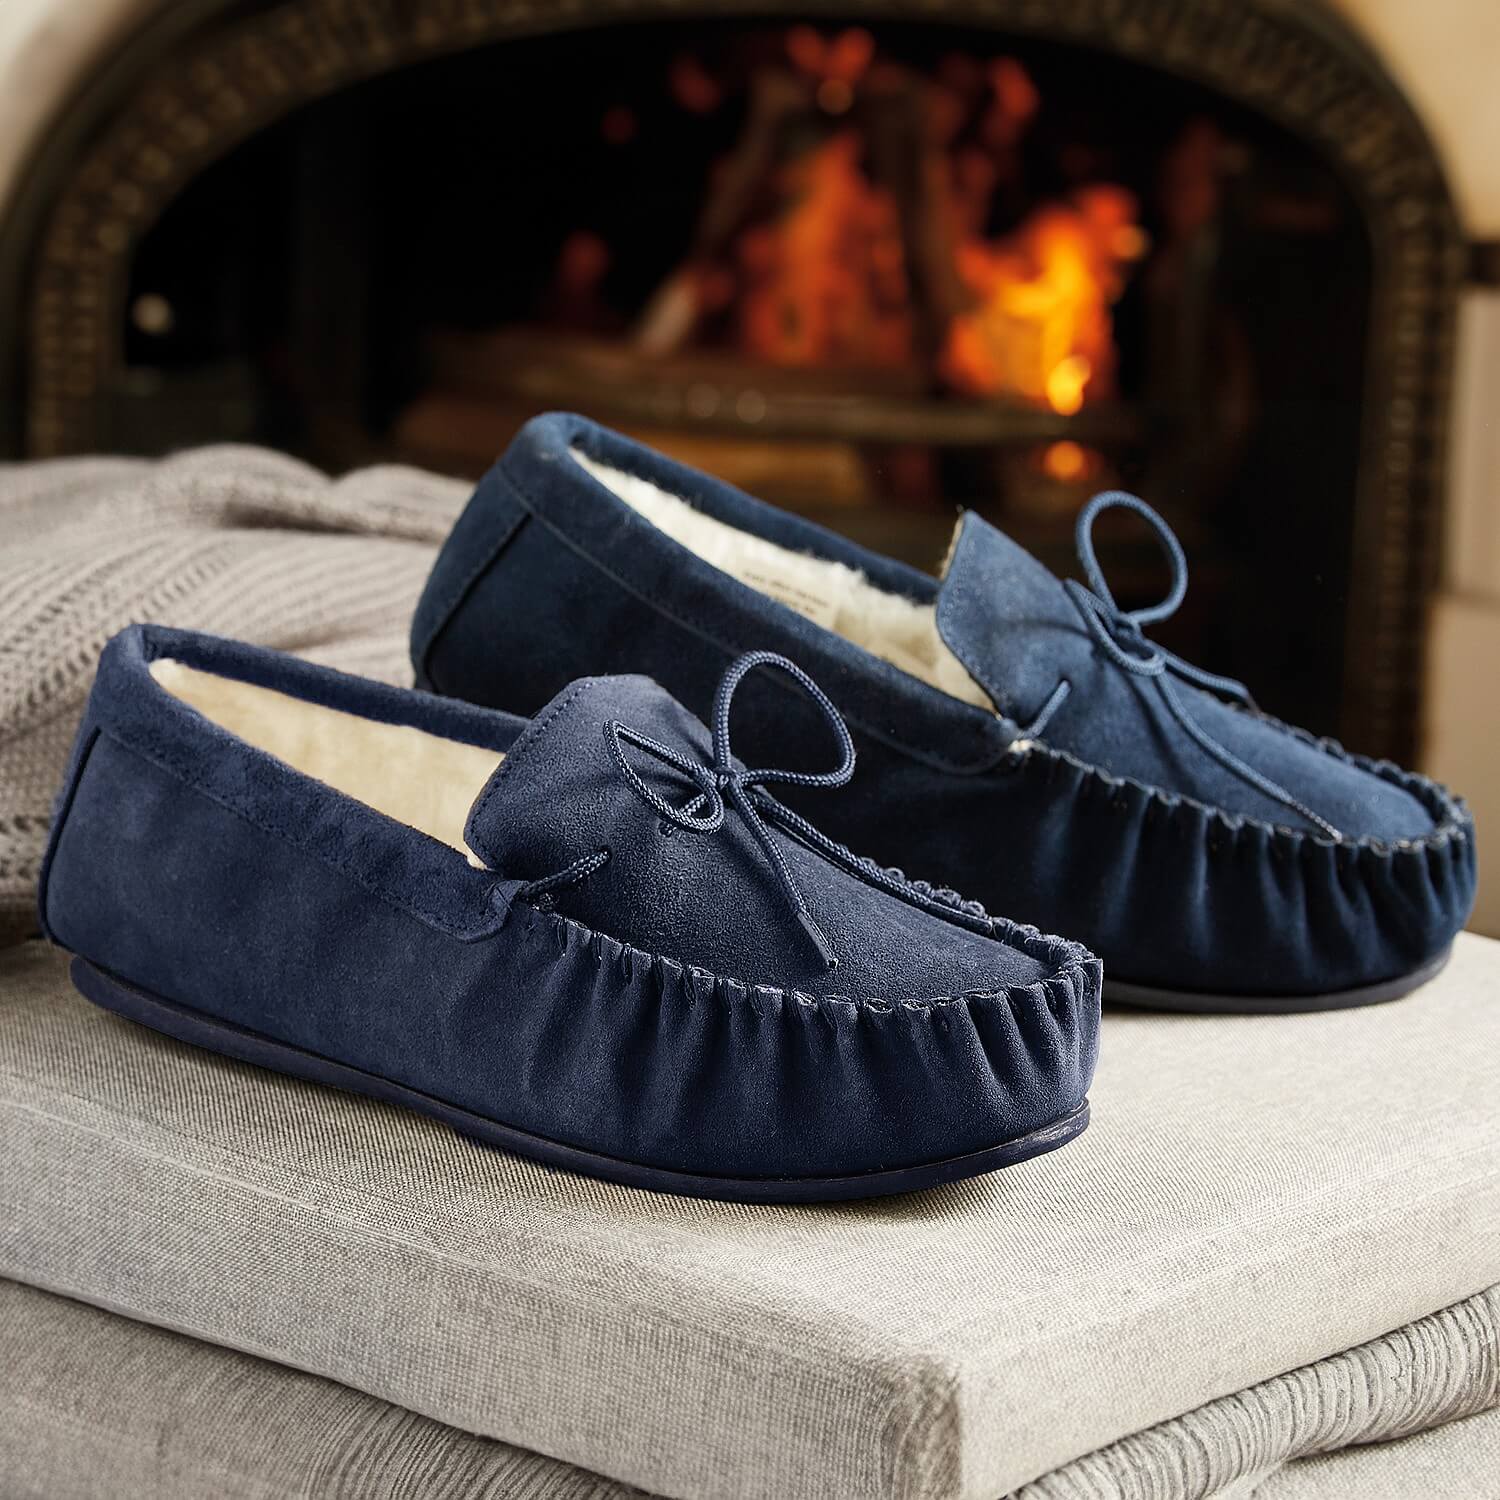 Men's Wool Lined Suede Moccasins